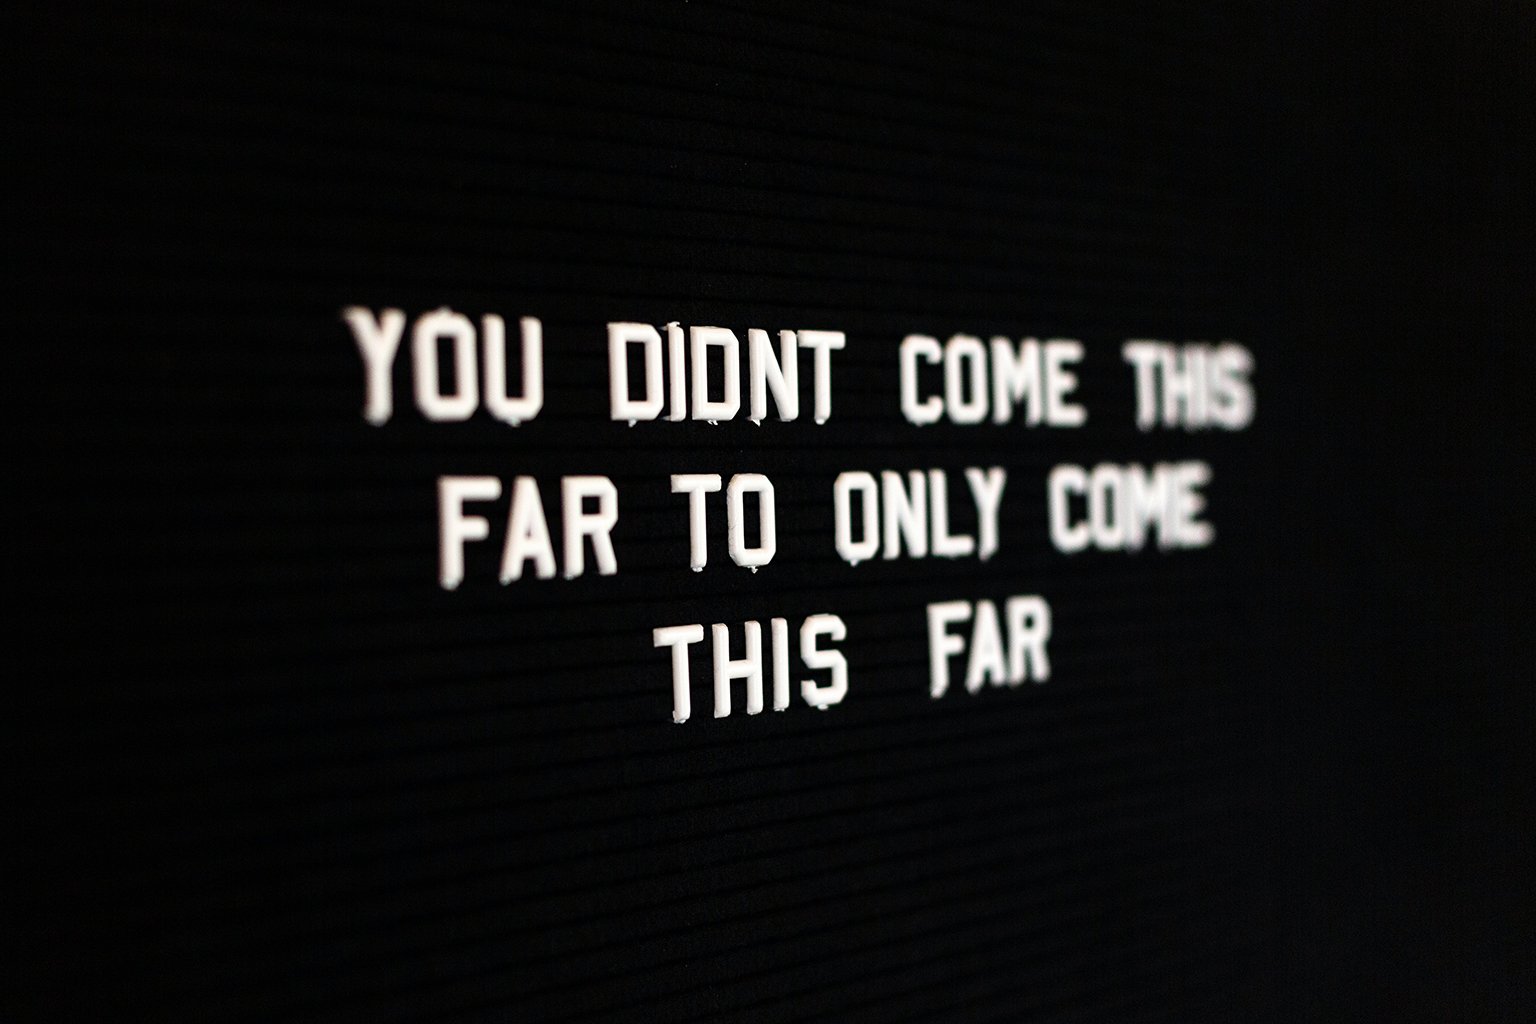 Black bulletin board with white letters saying: You didn't come this far to only come this far